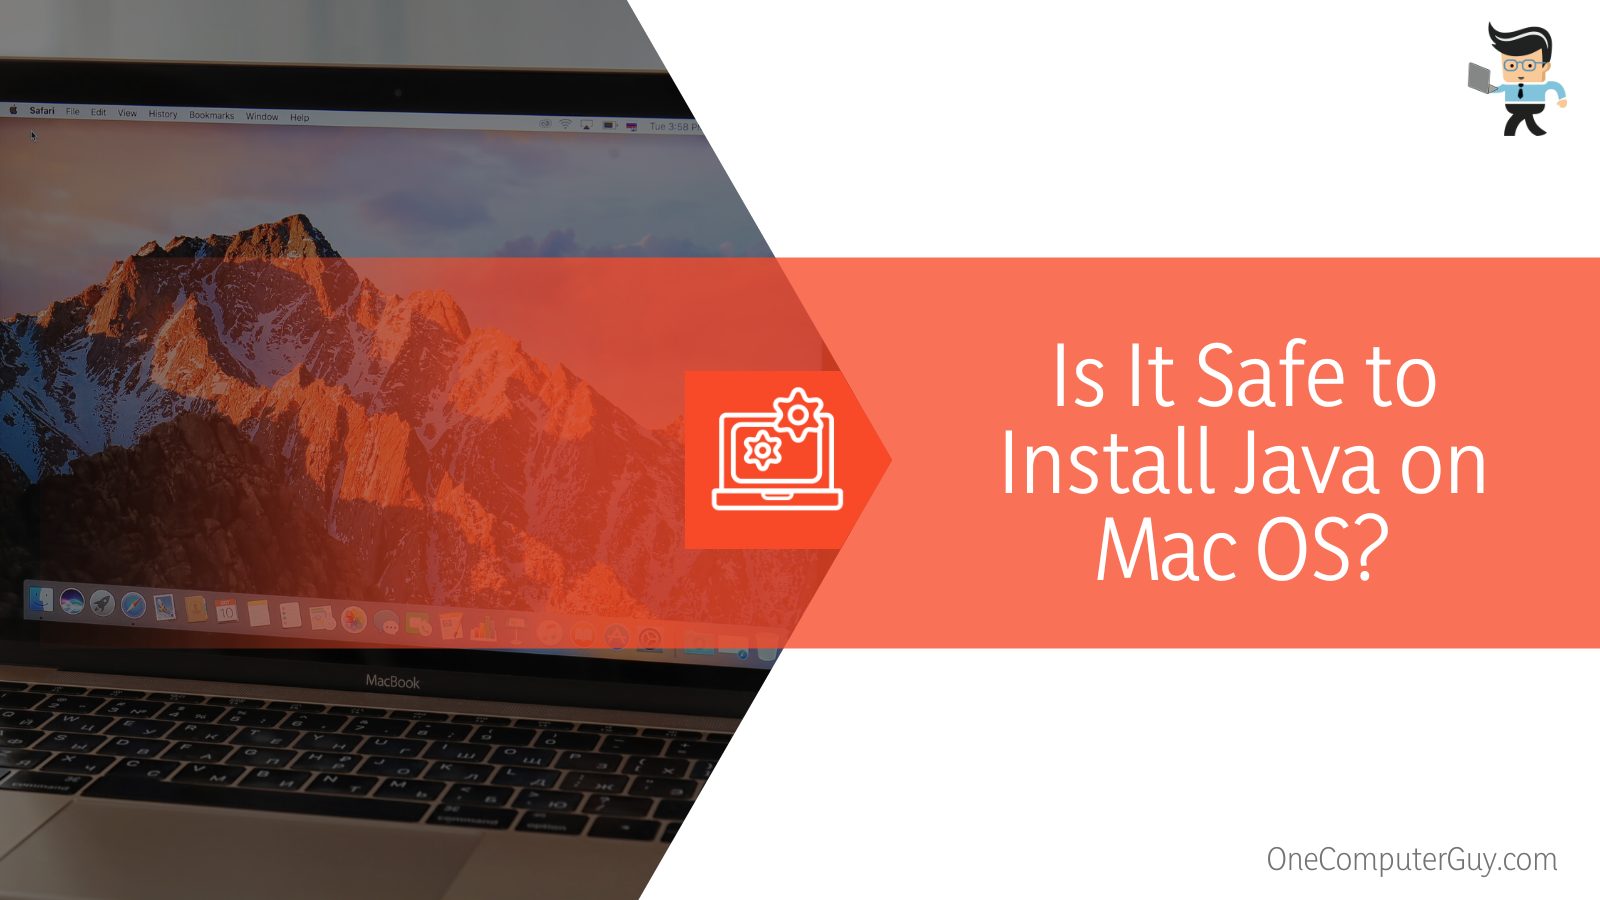 Safe to Install Java on Mac OS